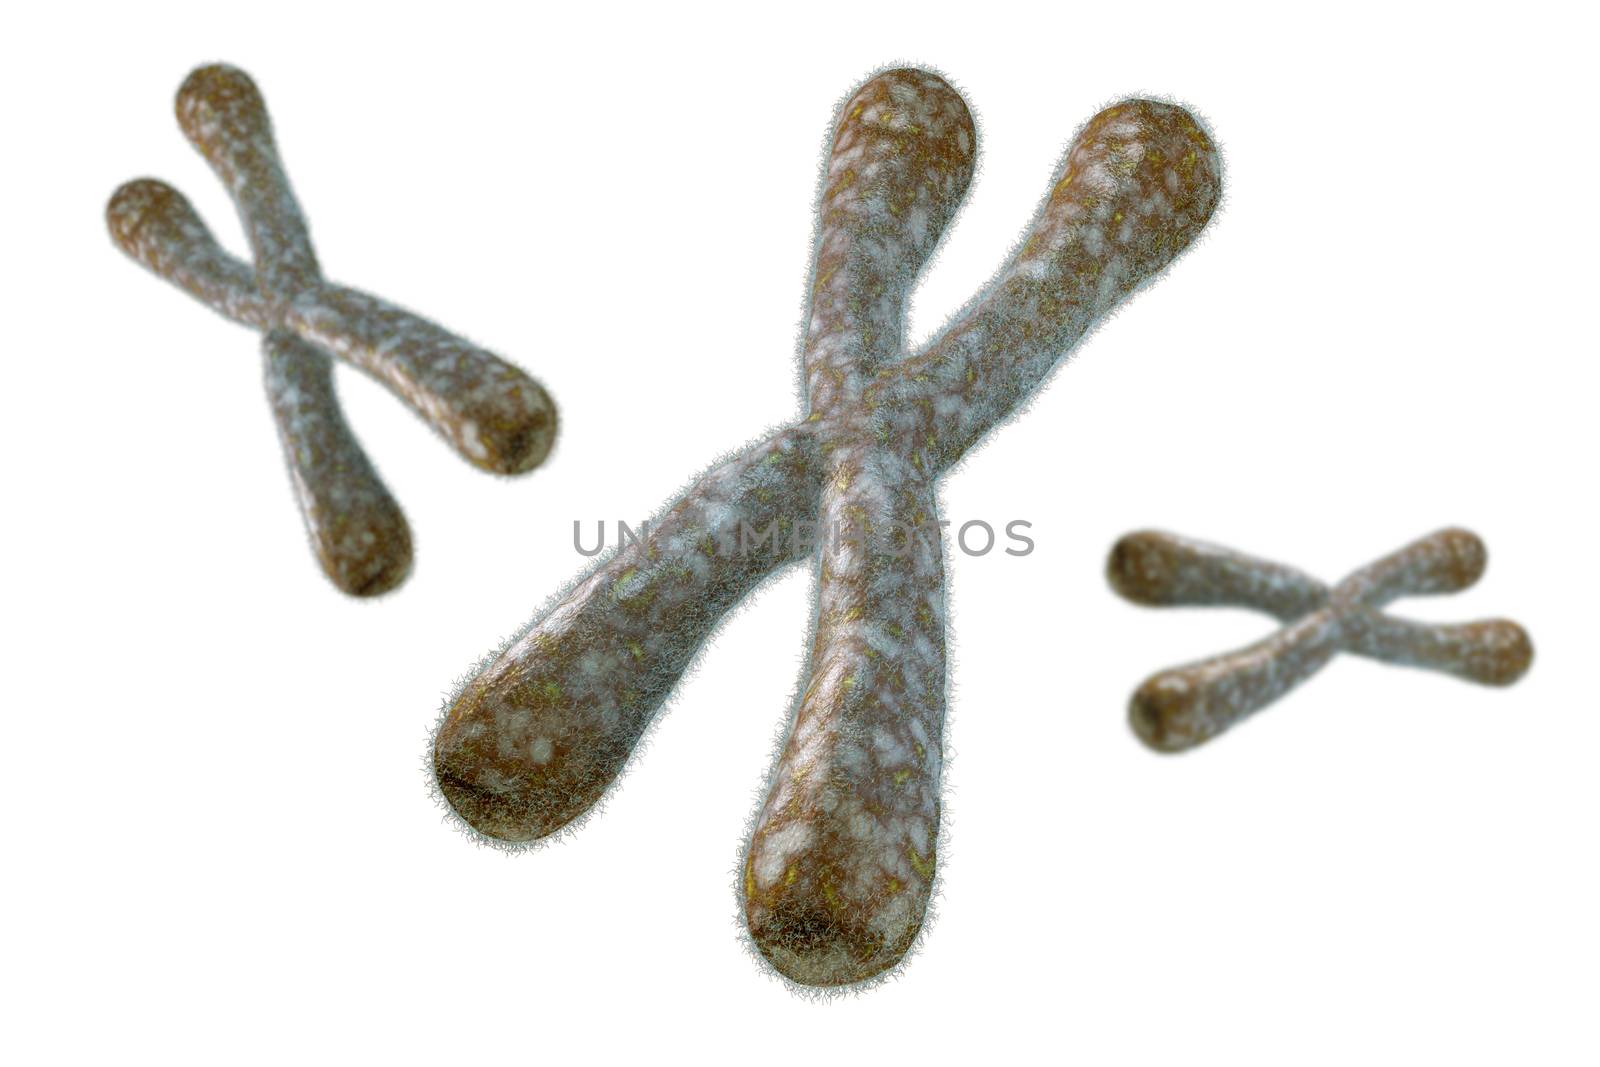 Telomeres - a specialized terminal structure of chromosomes consisting of DNA and proteins. Their function is to protect the ends of the chromosome from degradating.